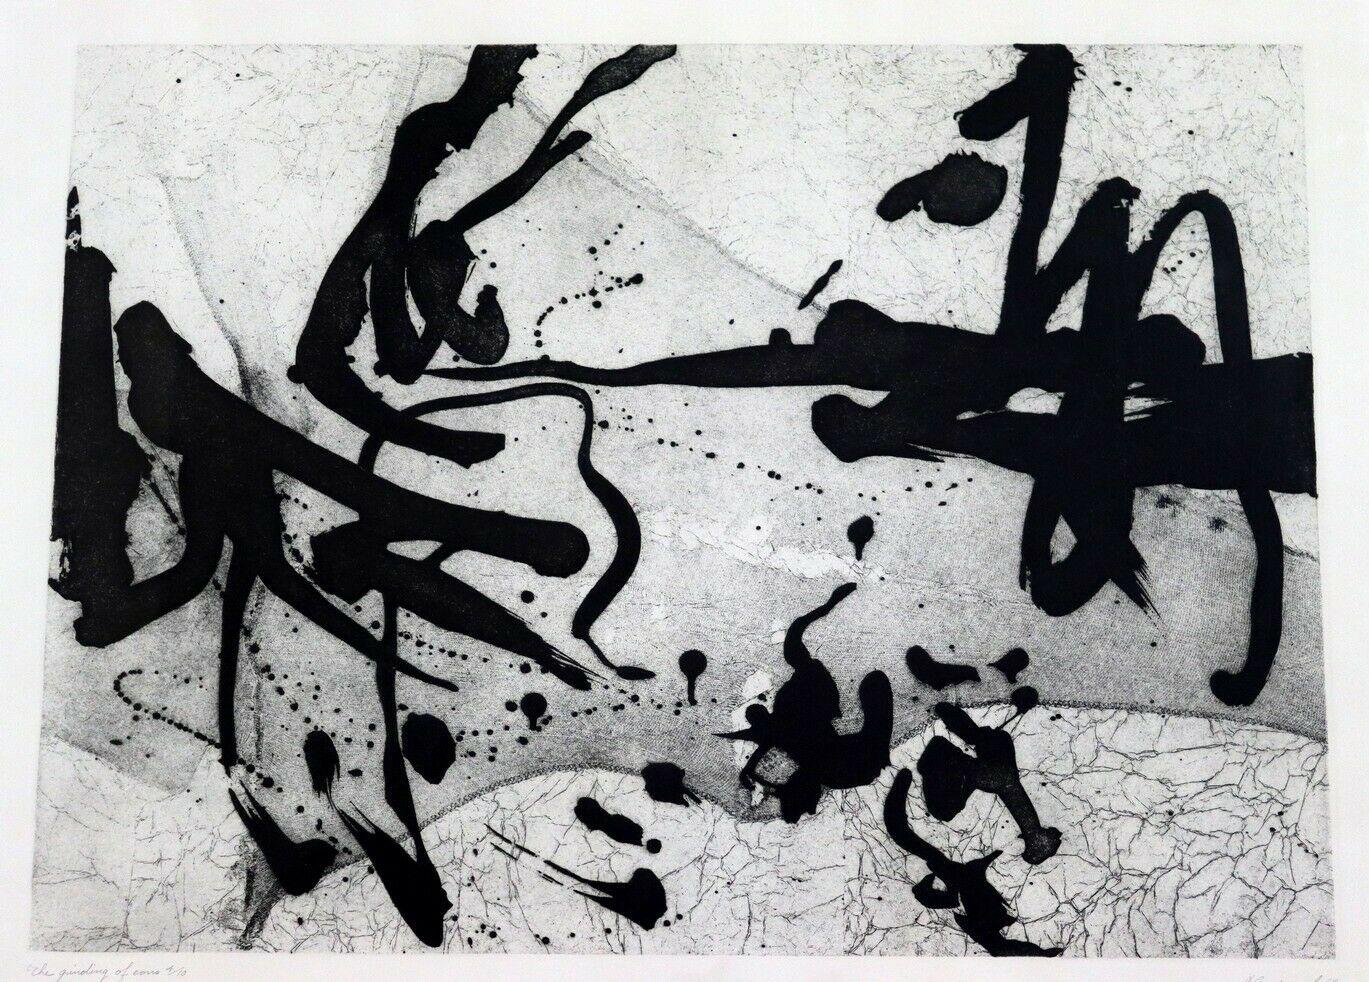 For your consideration is a modern black & white serigraph print 4/10 titled 